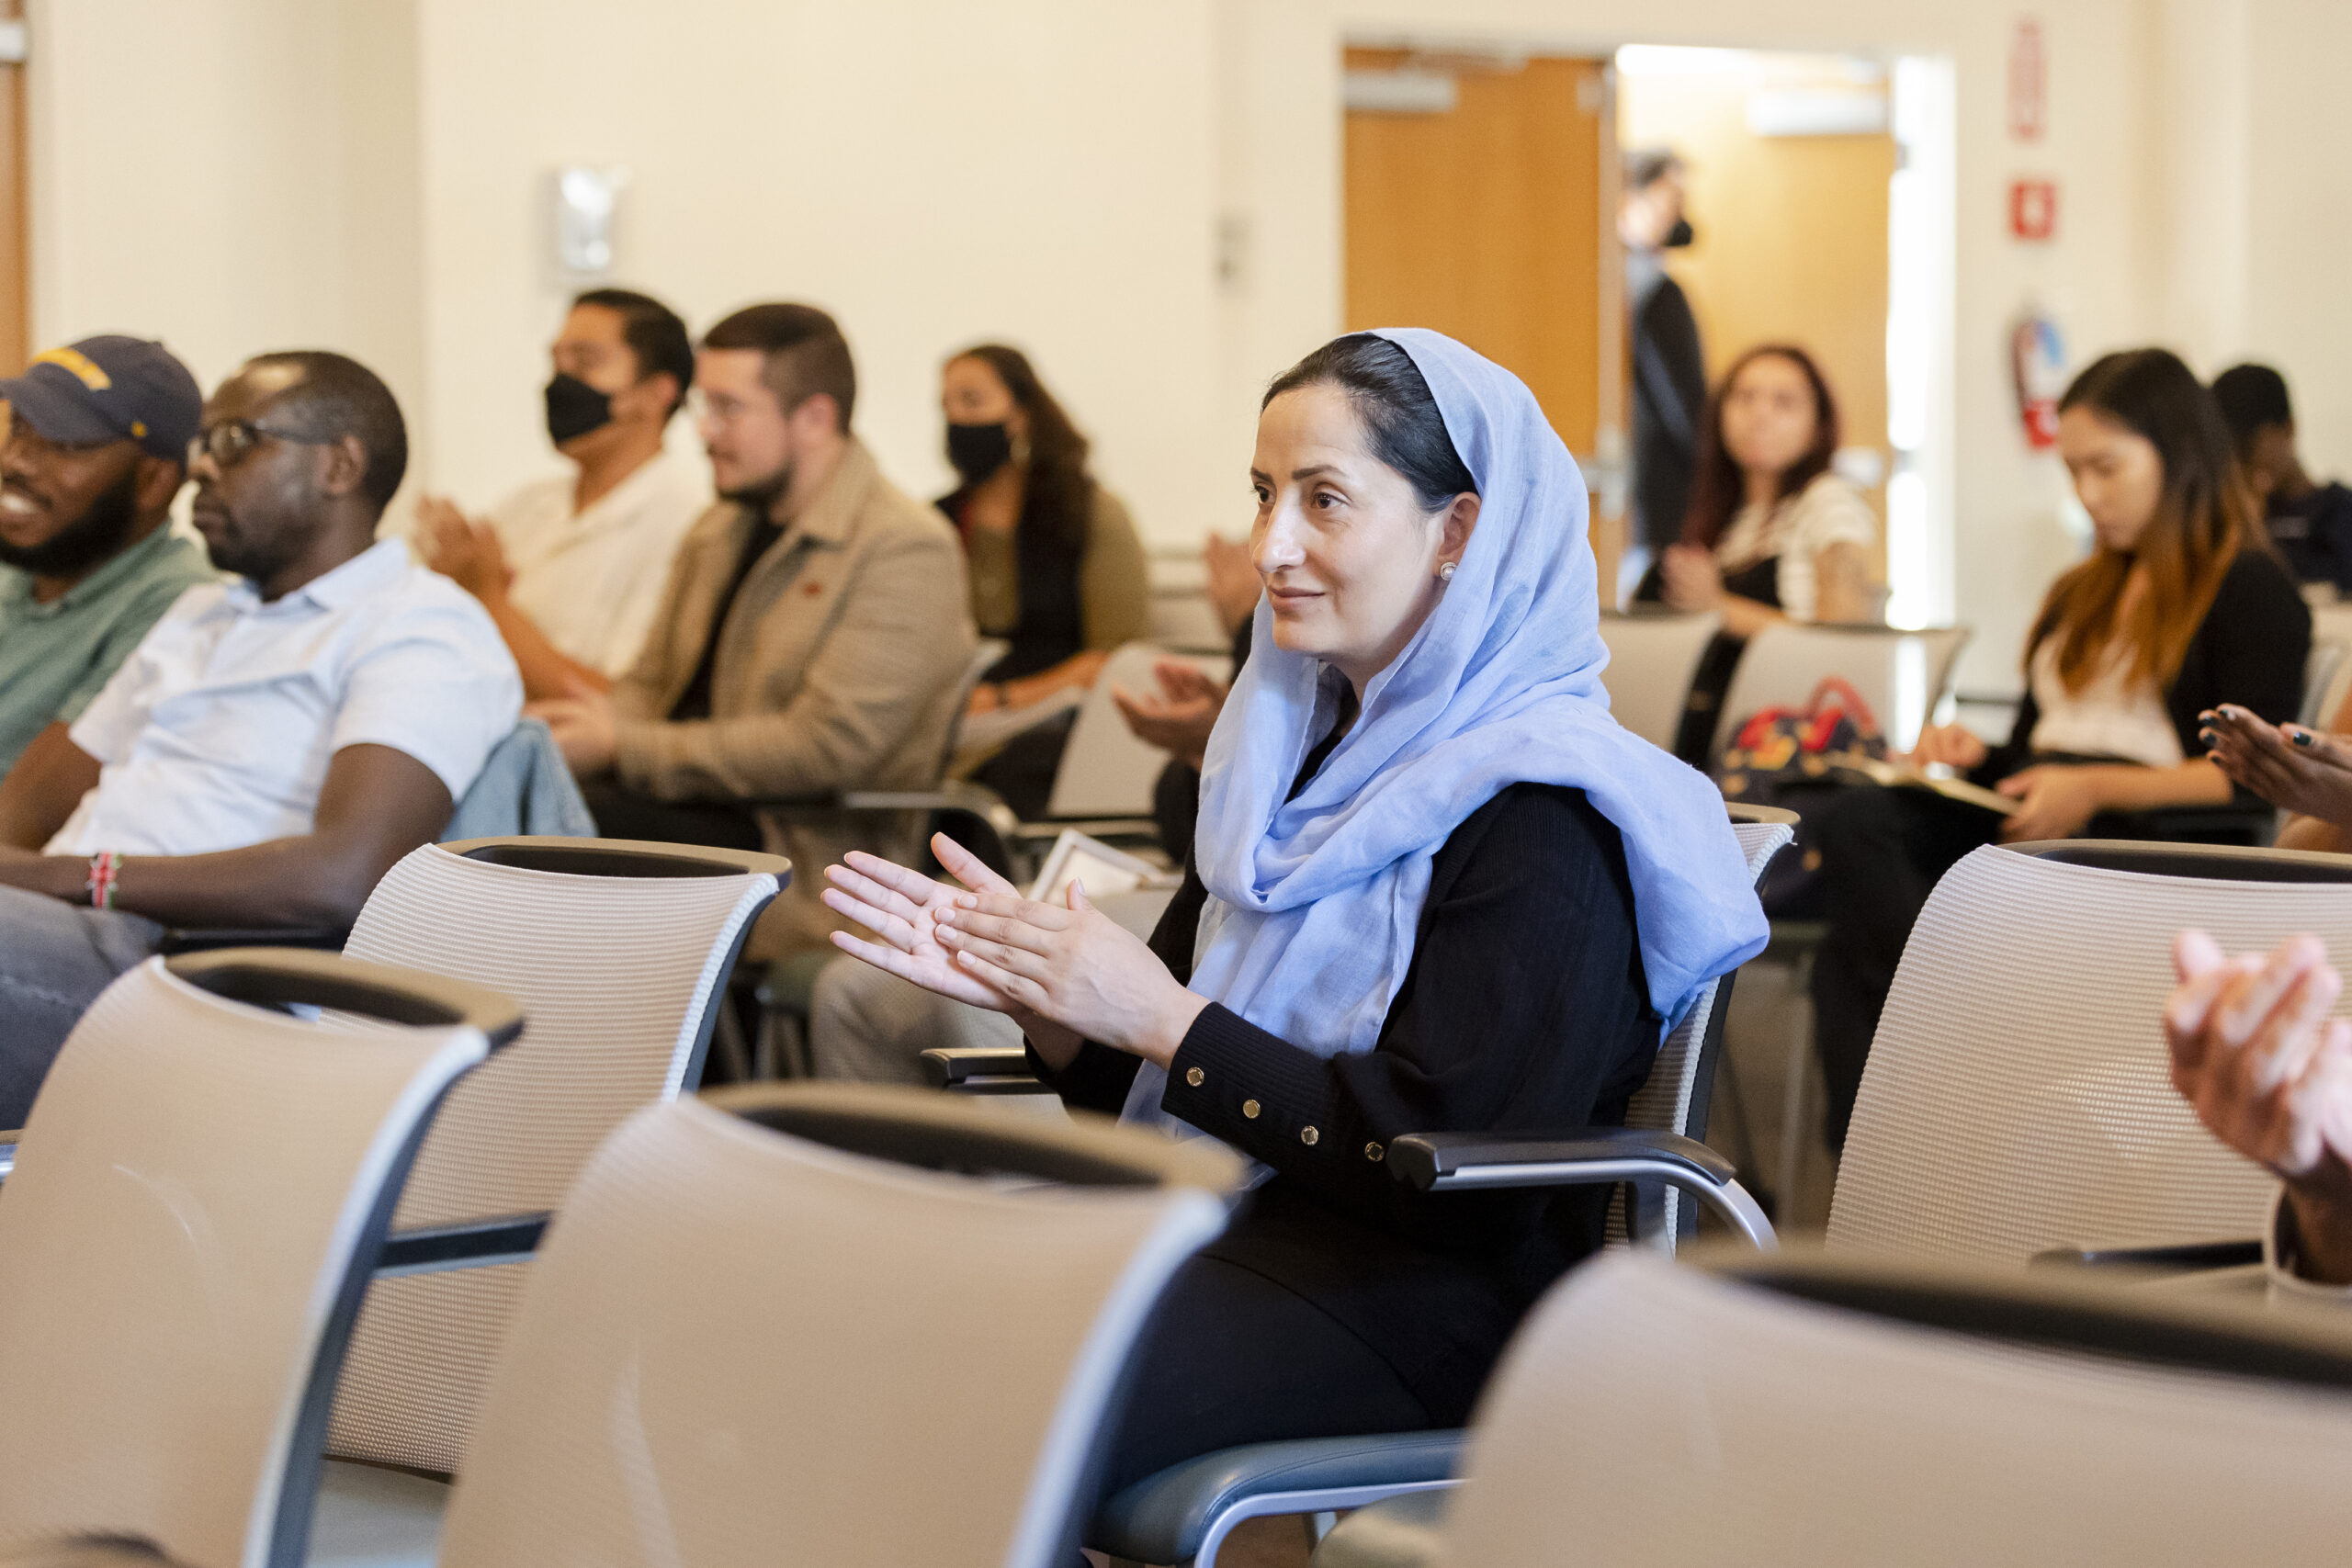 A woman wearing a blue hijab claps at an event.